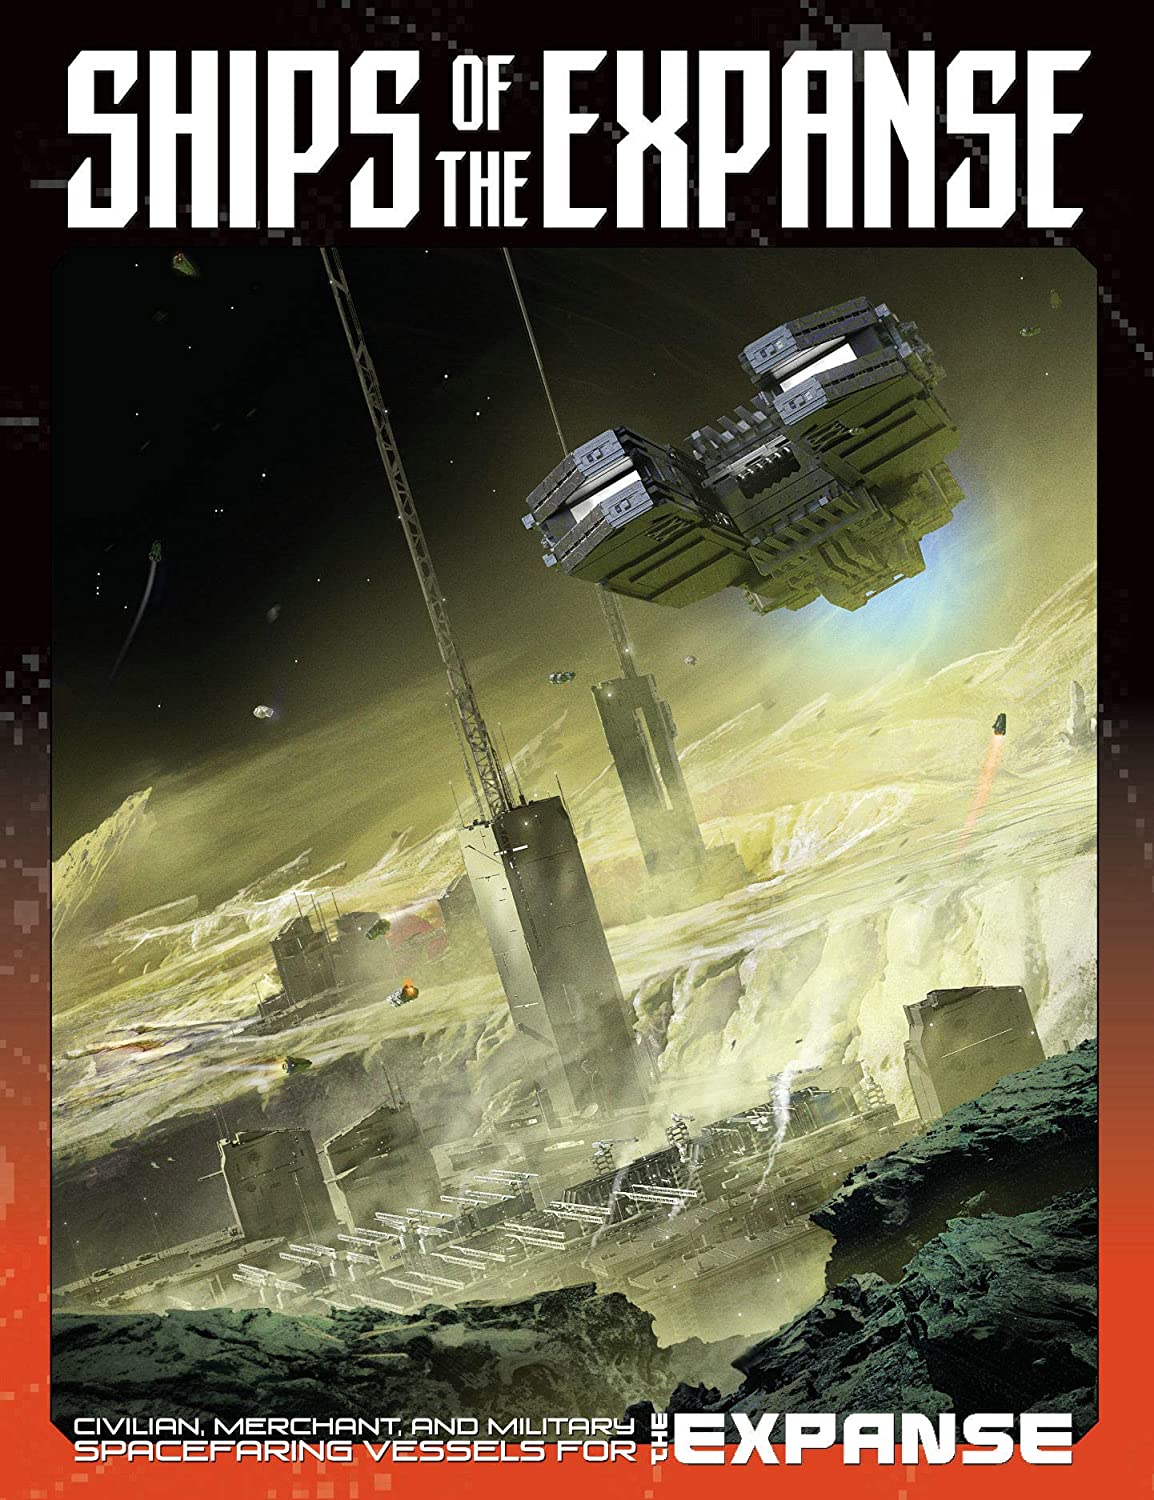 The Expanse: Ships of the Expanse Hardcover | Grognard Games